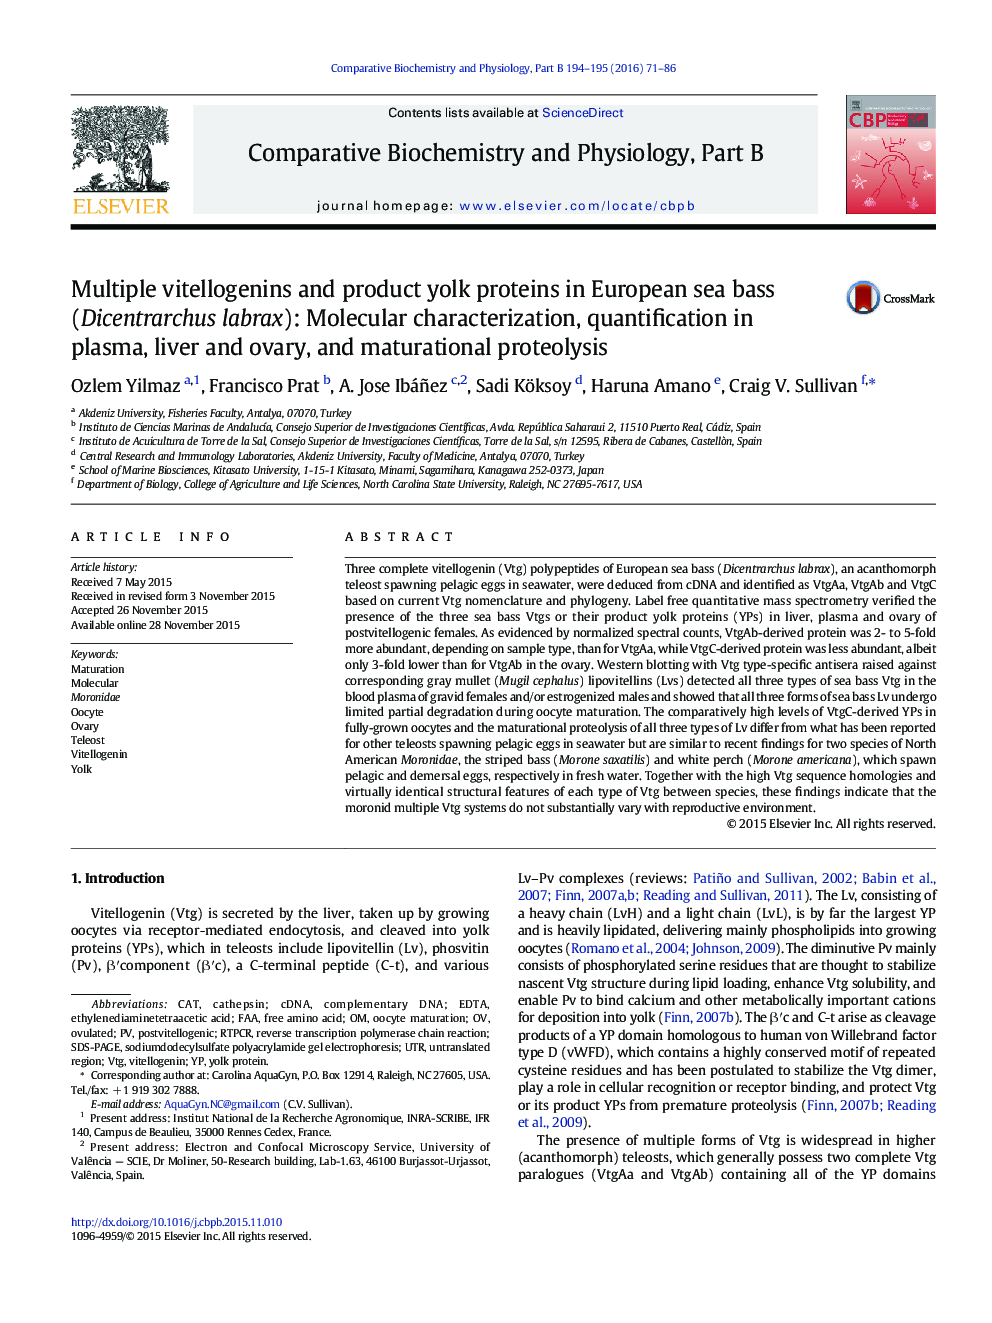 Multiple vitellogenins and product yolk proteins in European sea bass (Dicentrarchus labrax): Molecular characterization, quantification in plasma, liver and ovary, and maturational proteolysis